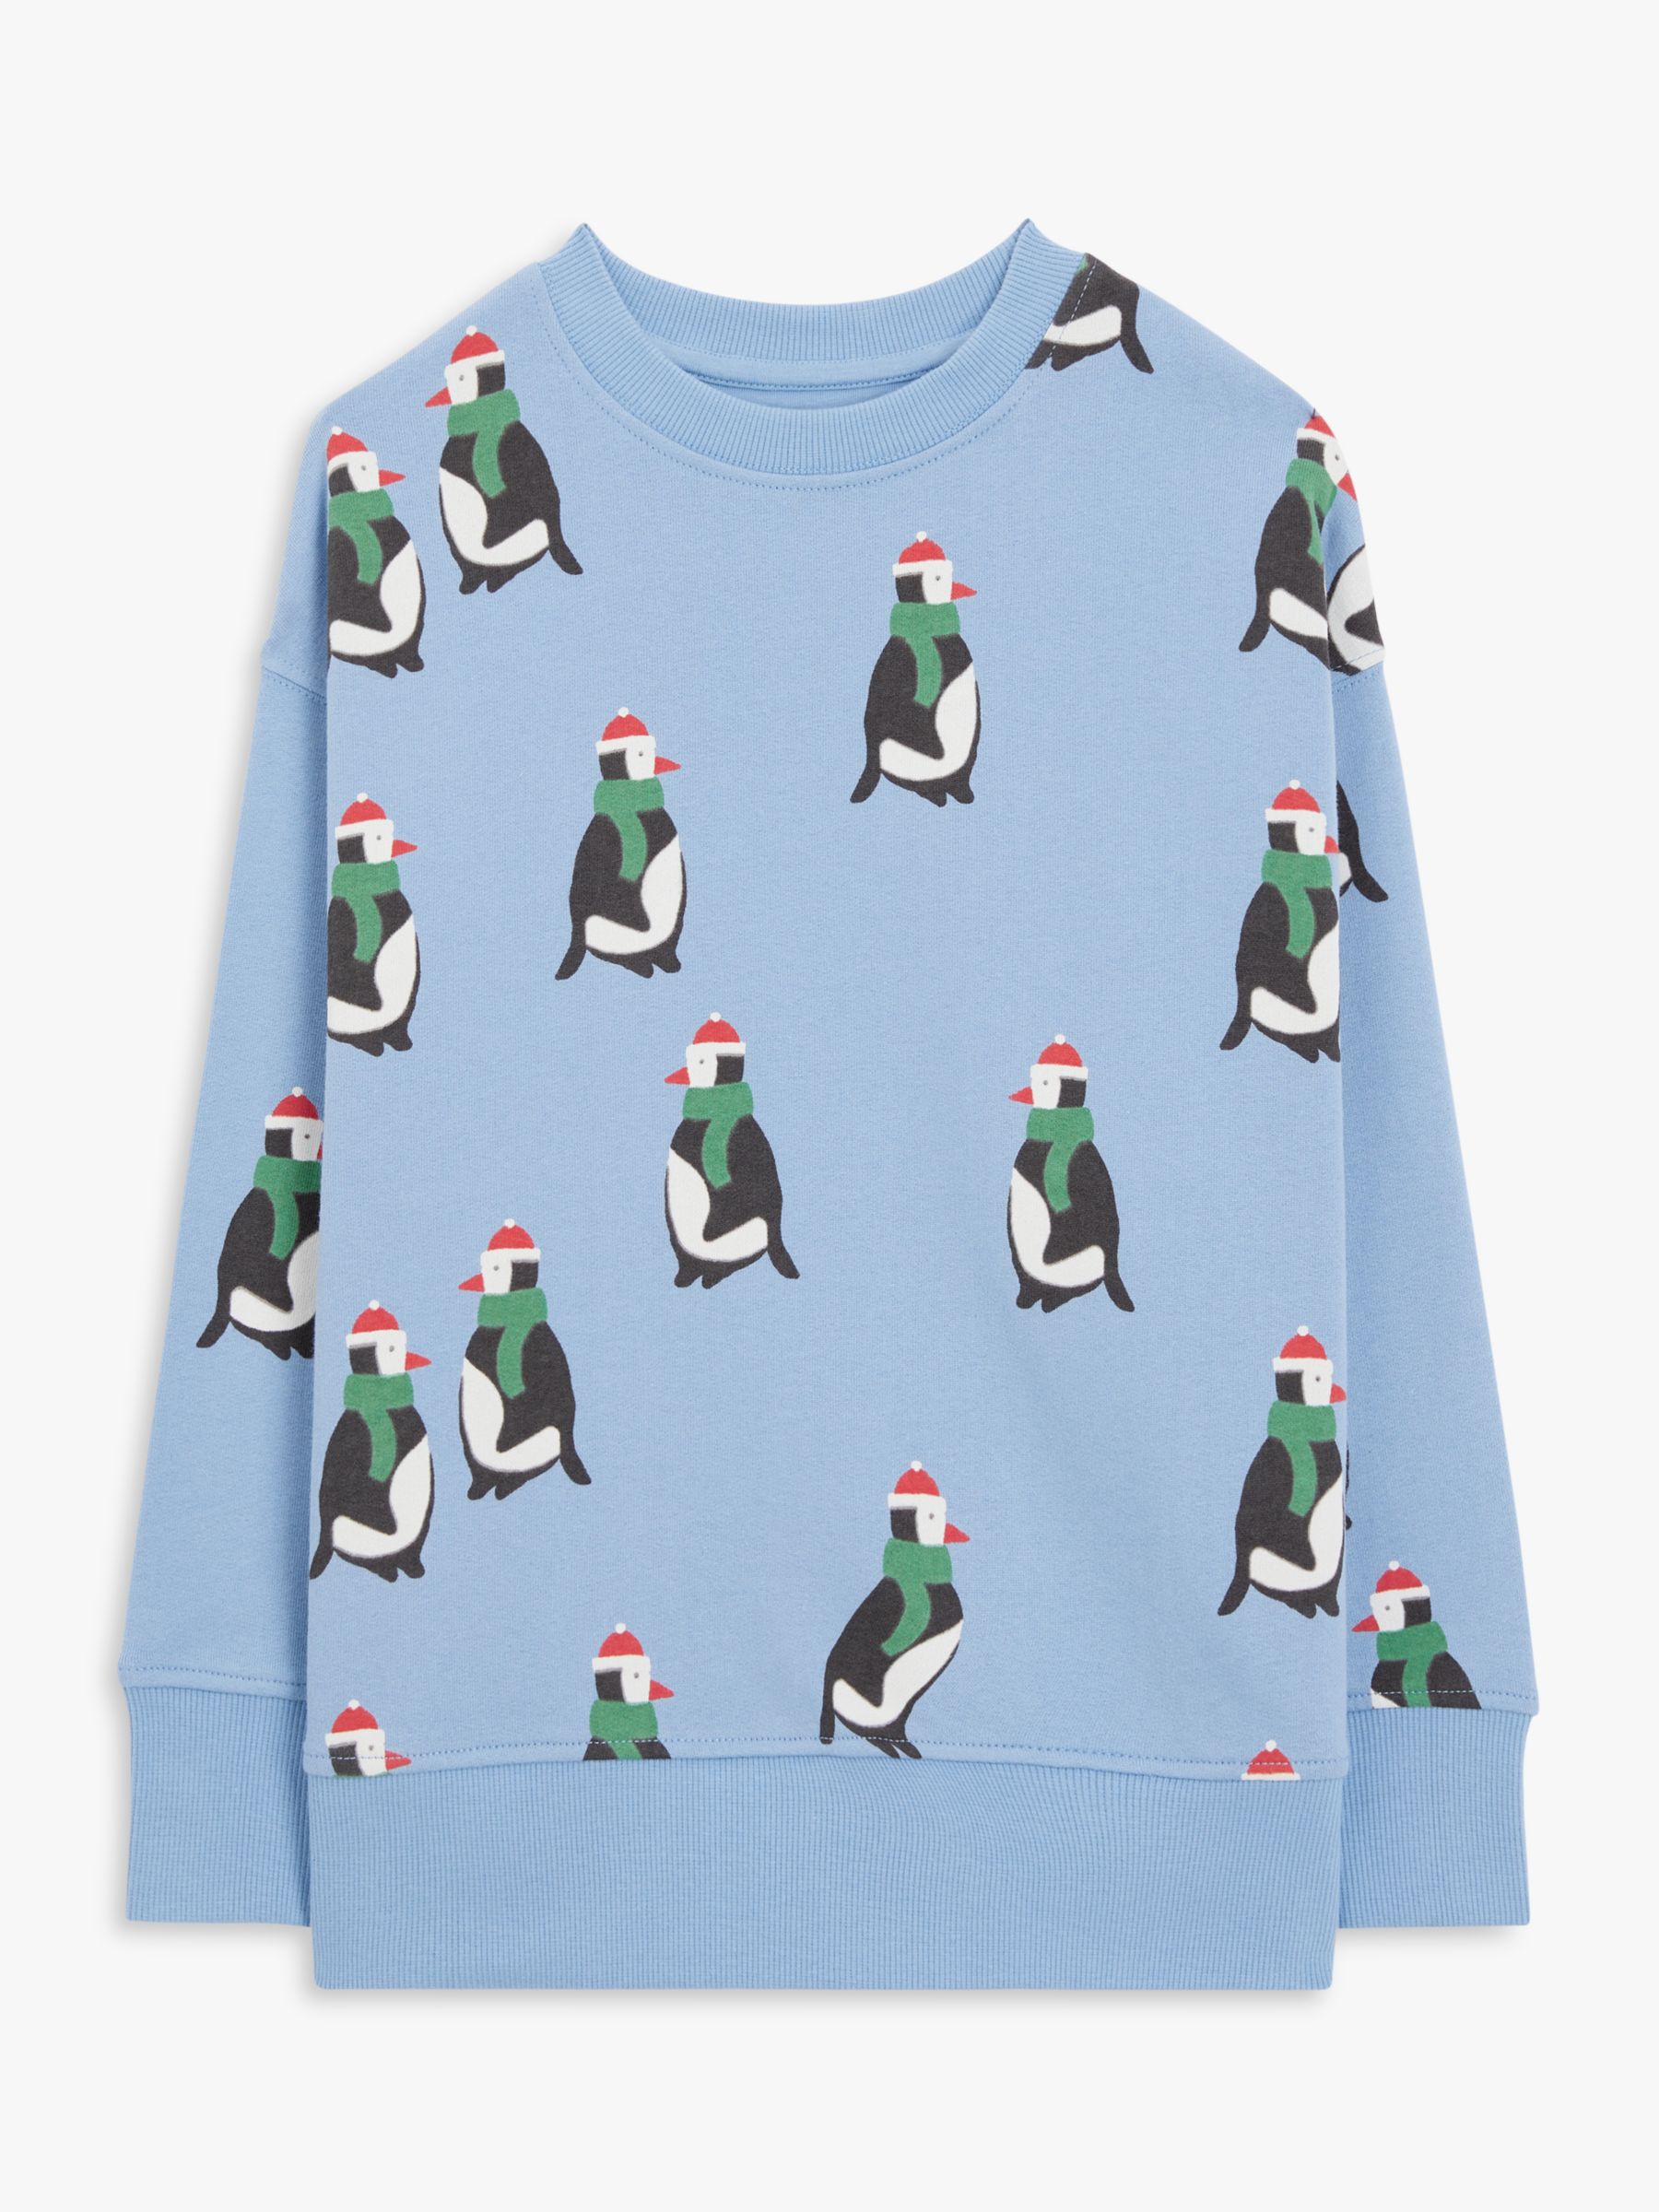 5 X Childrens & Adults Christmas Penguin Jumper / Sweater 